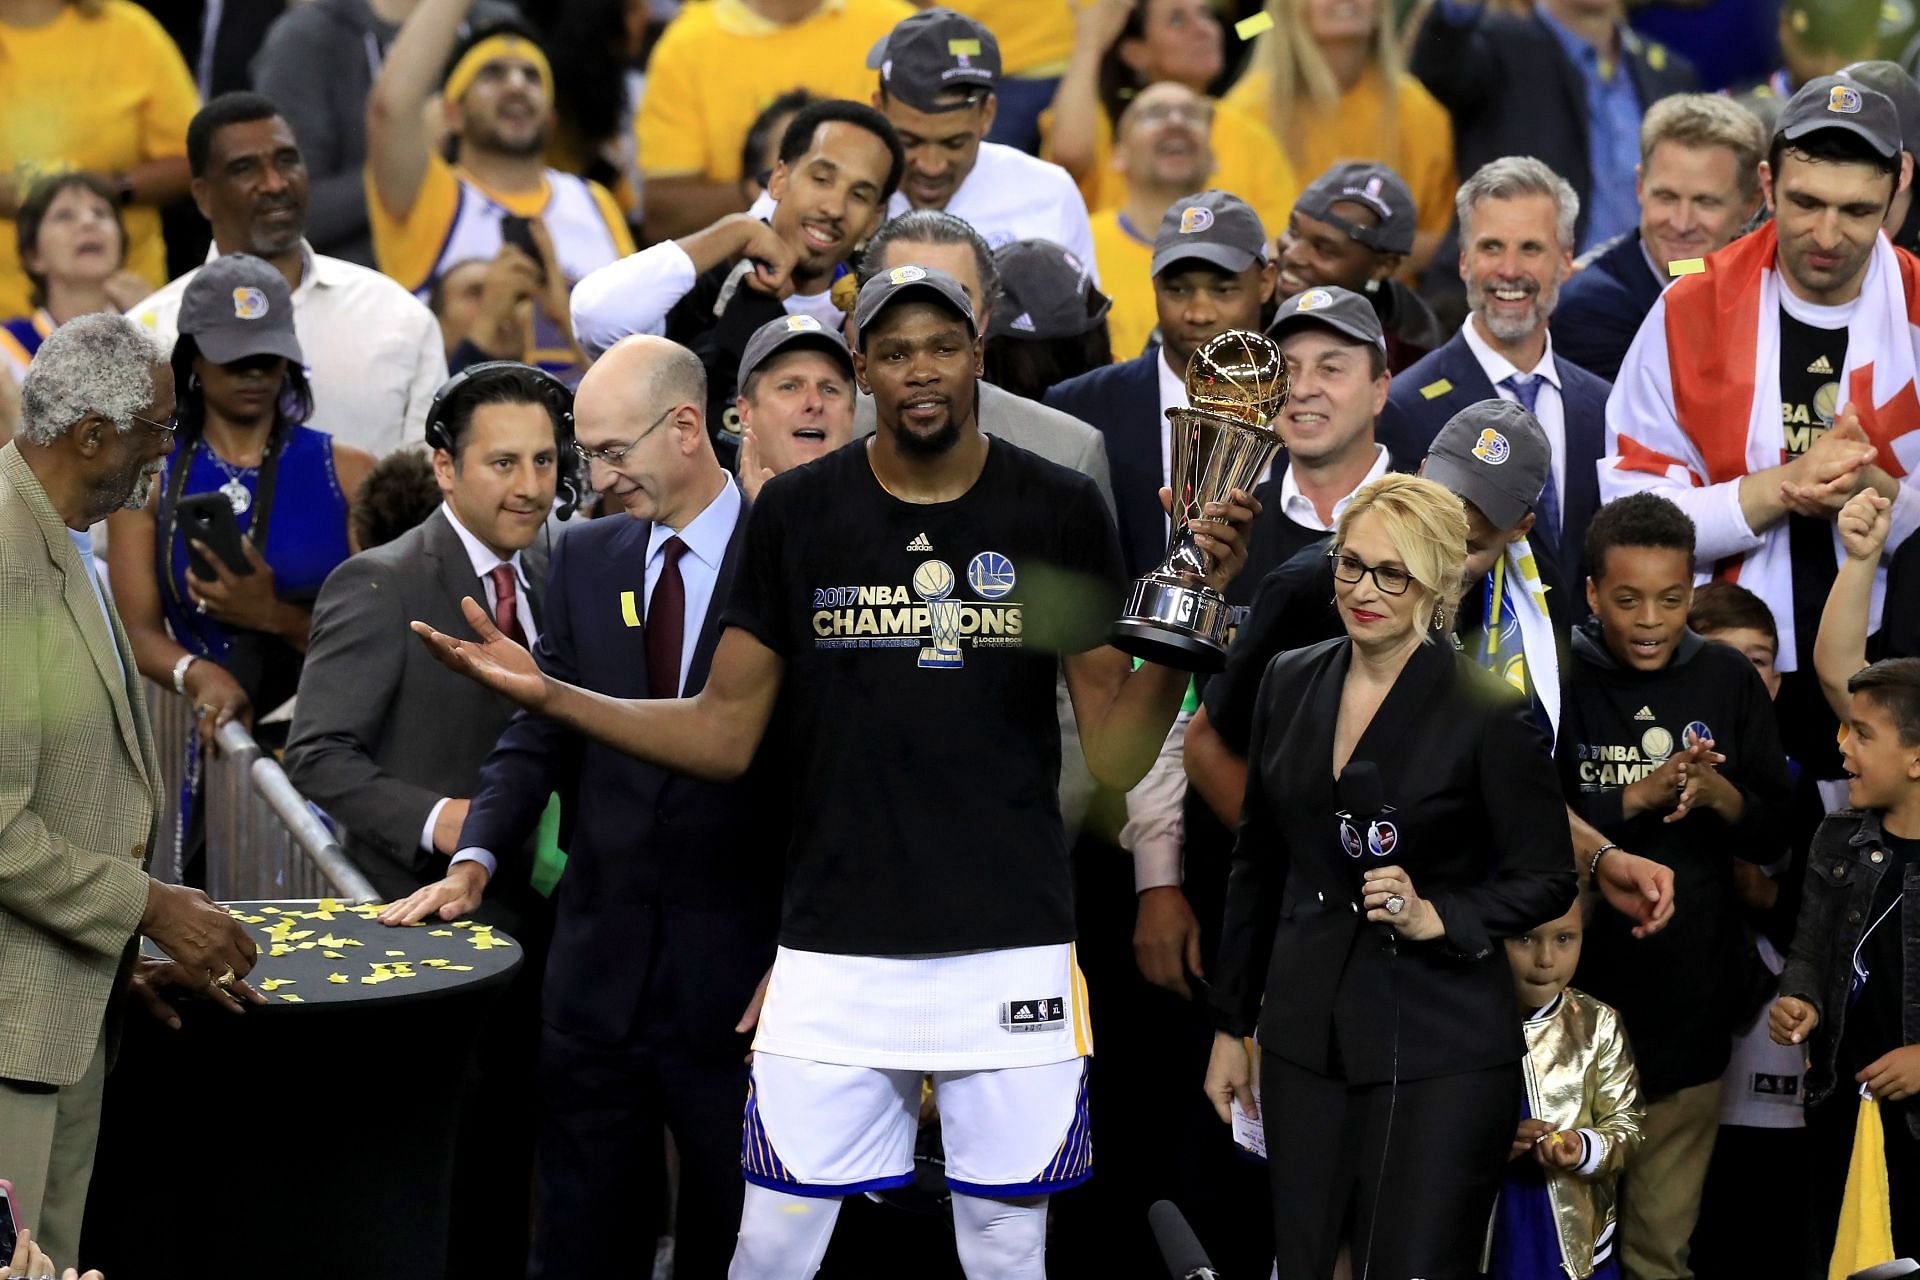 A return to Golden State could be what helps Durant win more championships and awards.